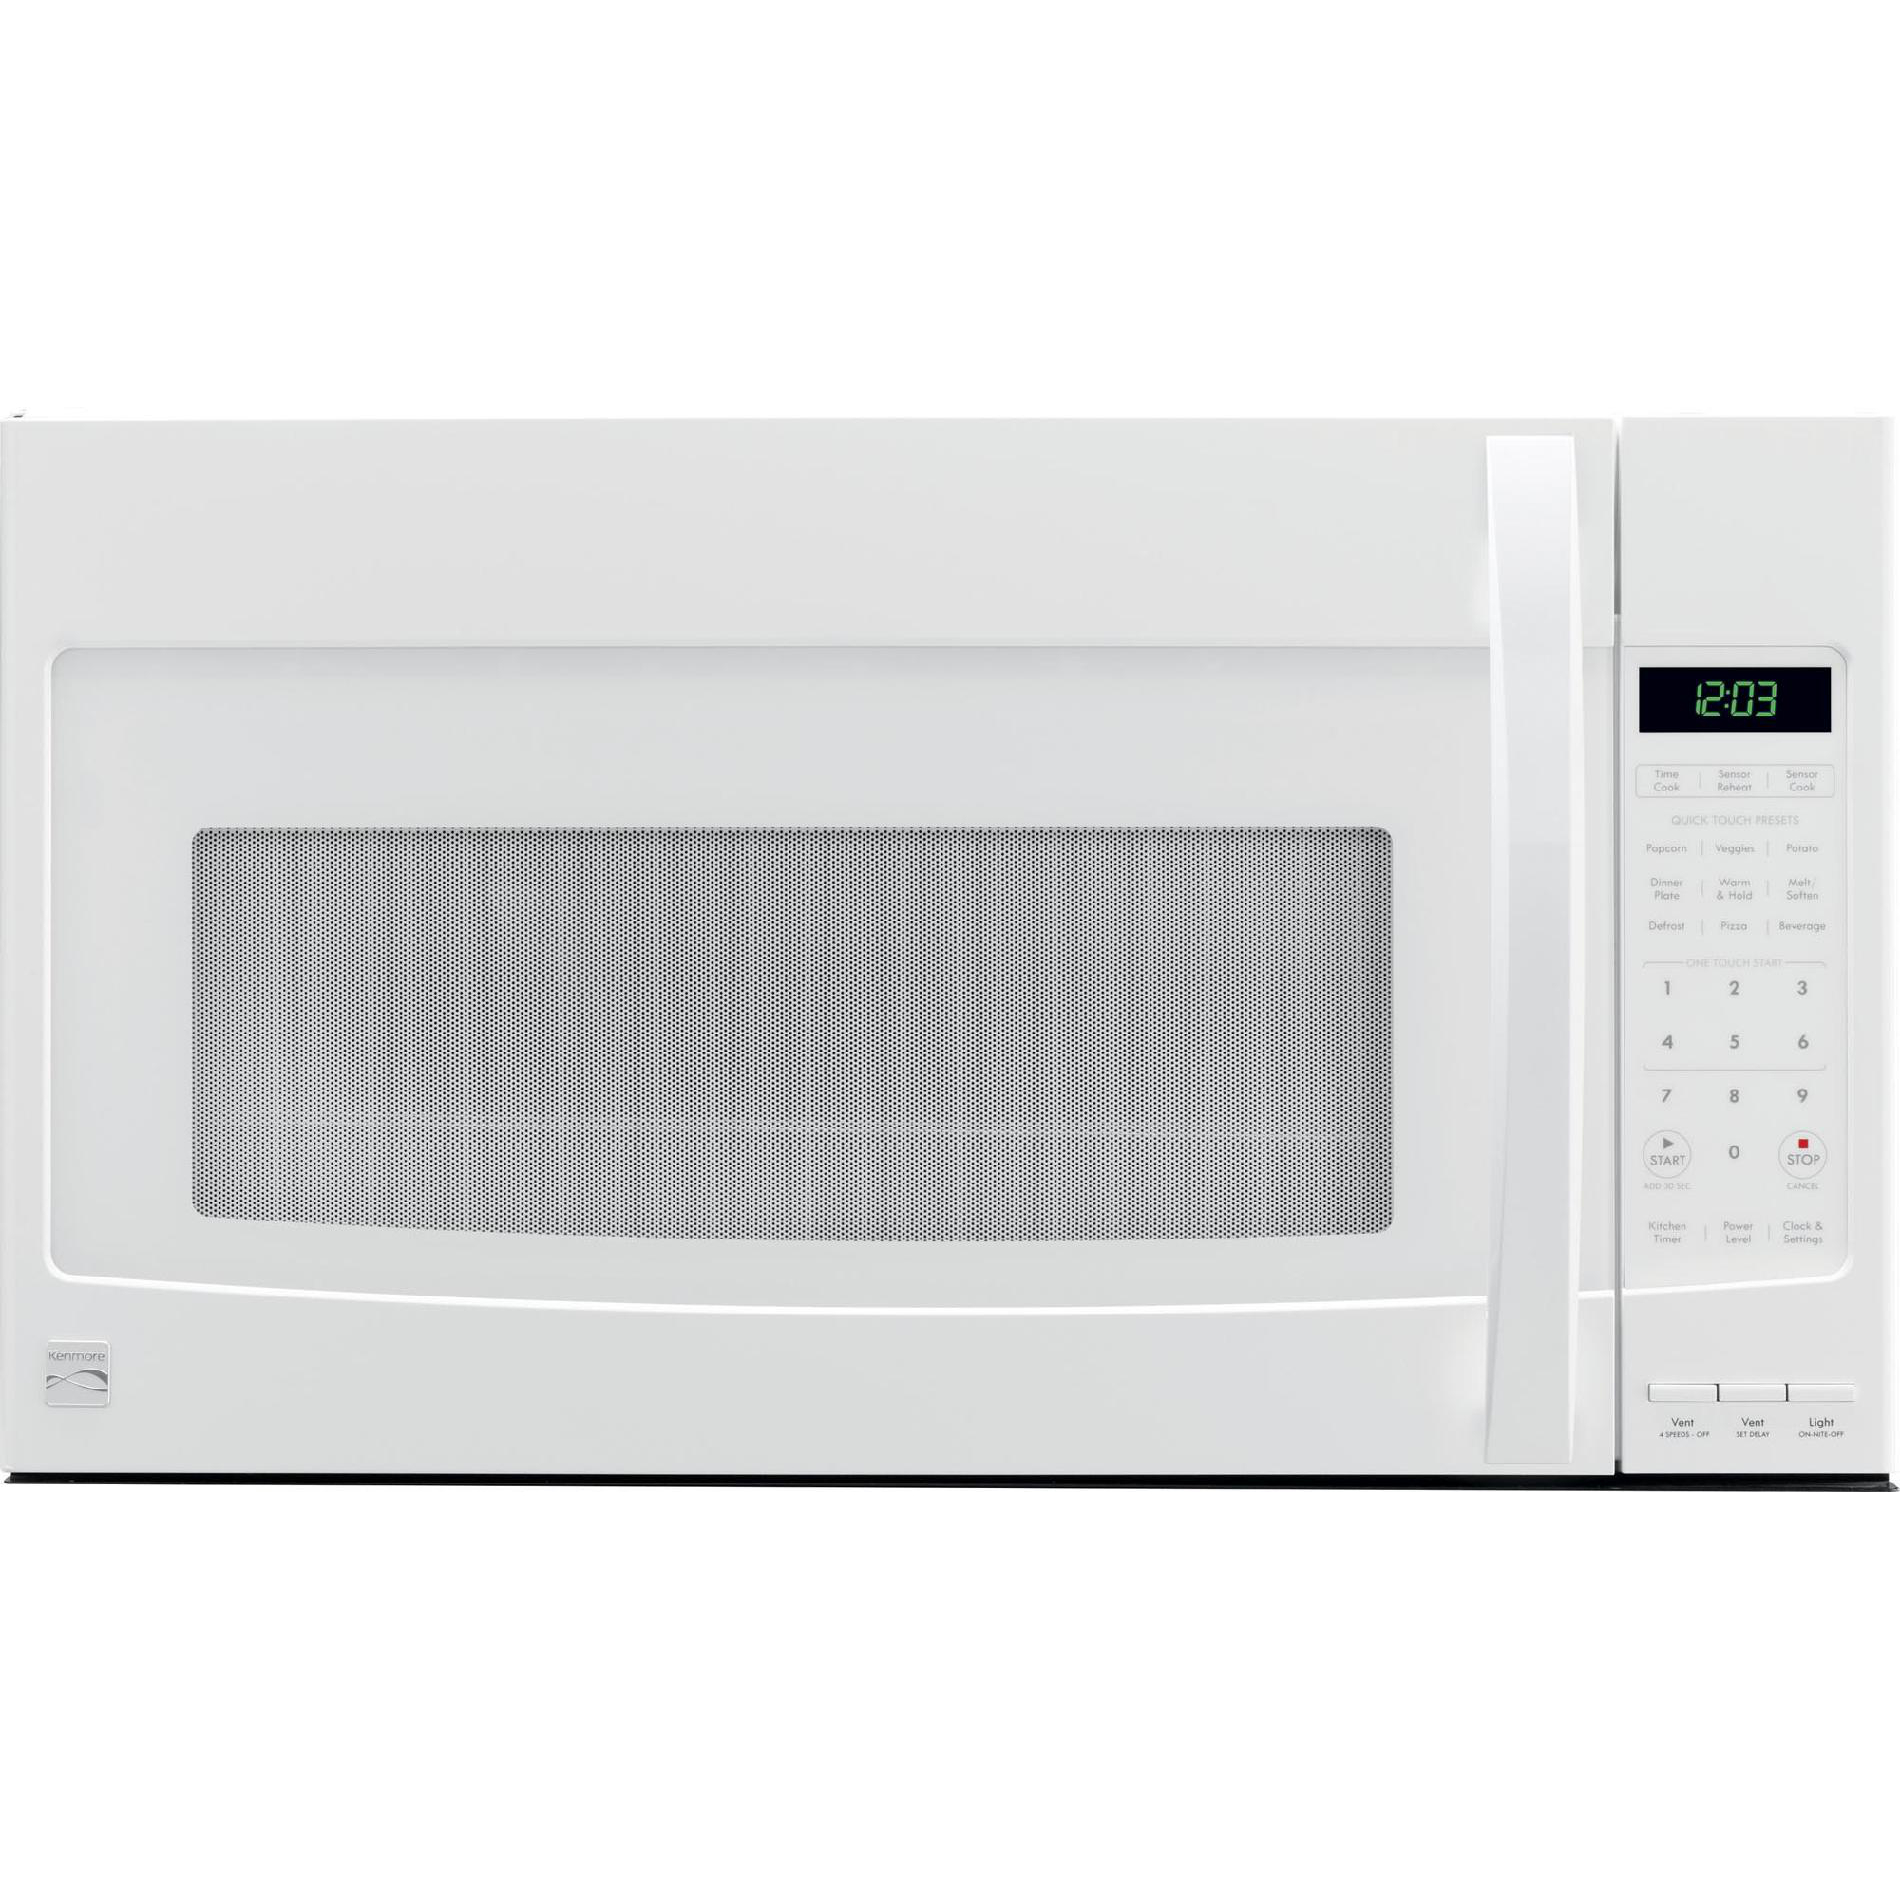 Kenmore 80352 2.1 cu. ft. Over-the-Range Microwave - White